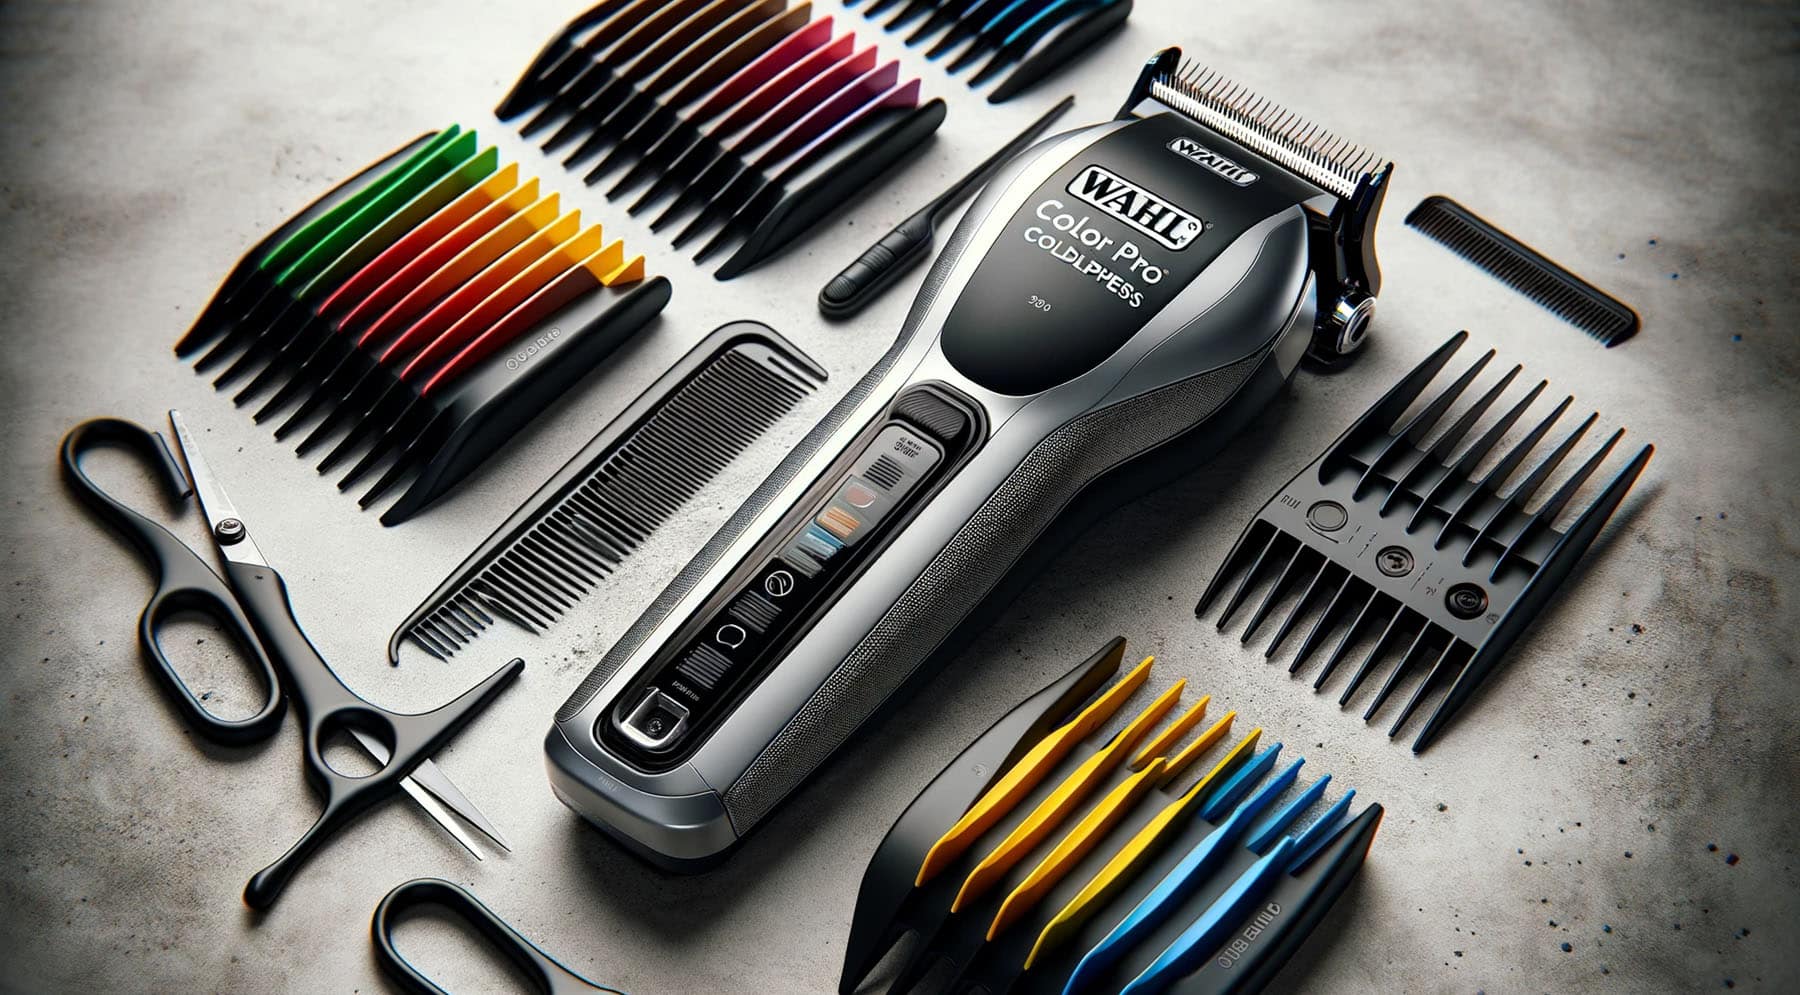 Wahl Color Pro Cordless Hair Clipper with color-coded guide combs